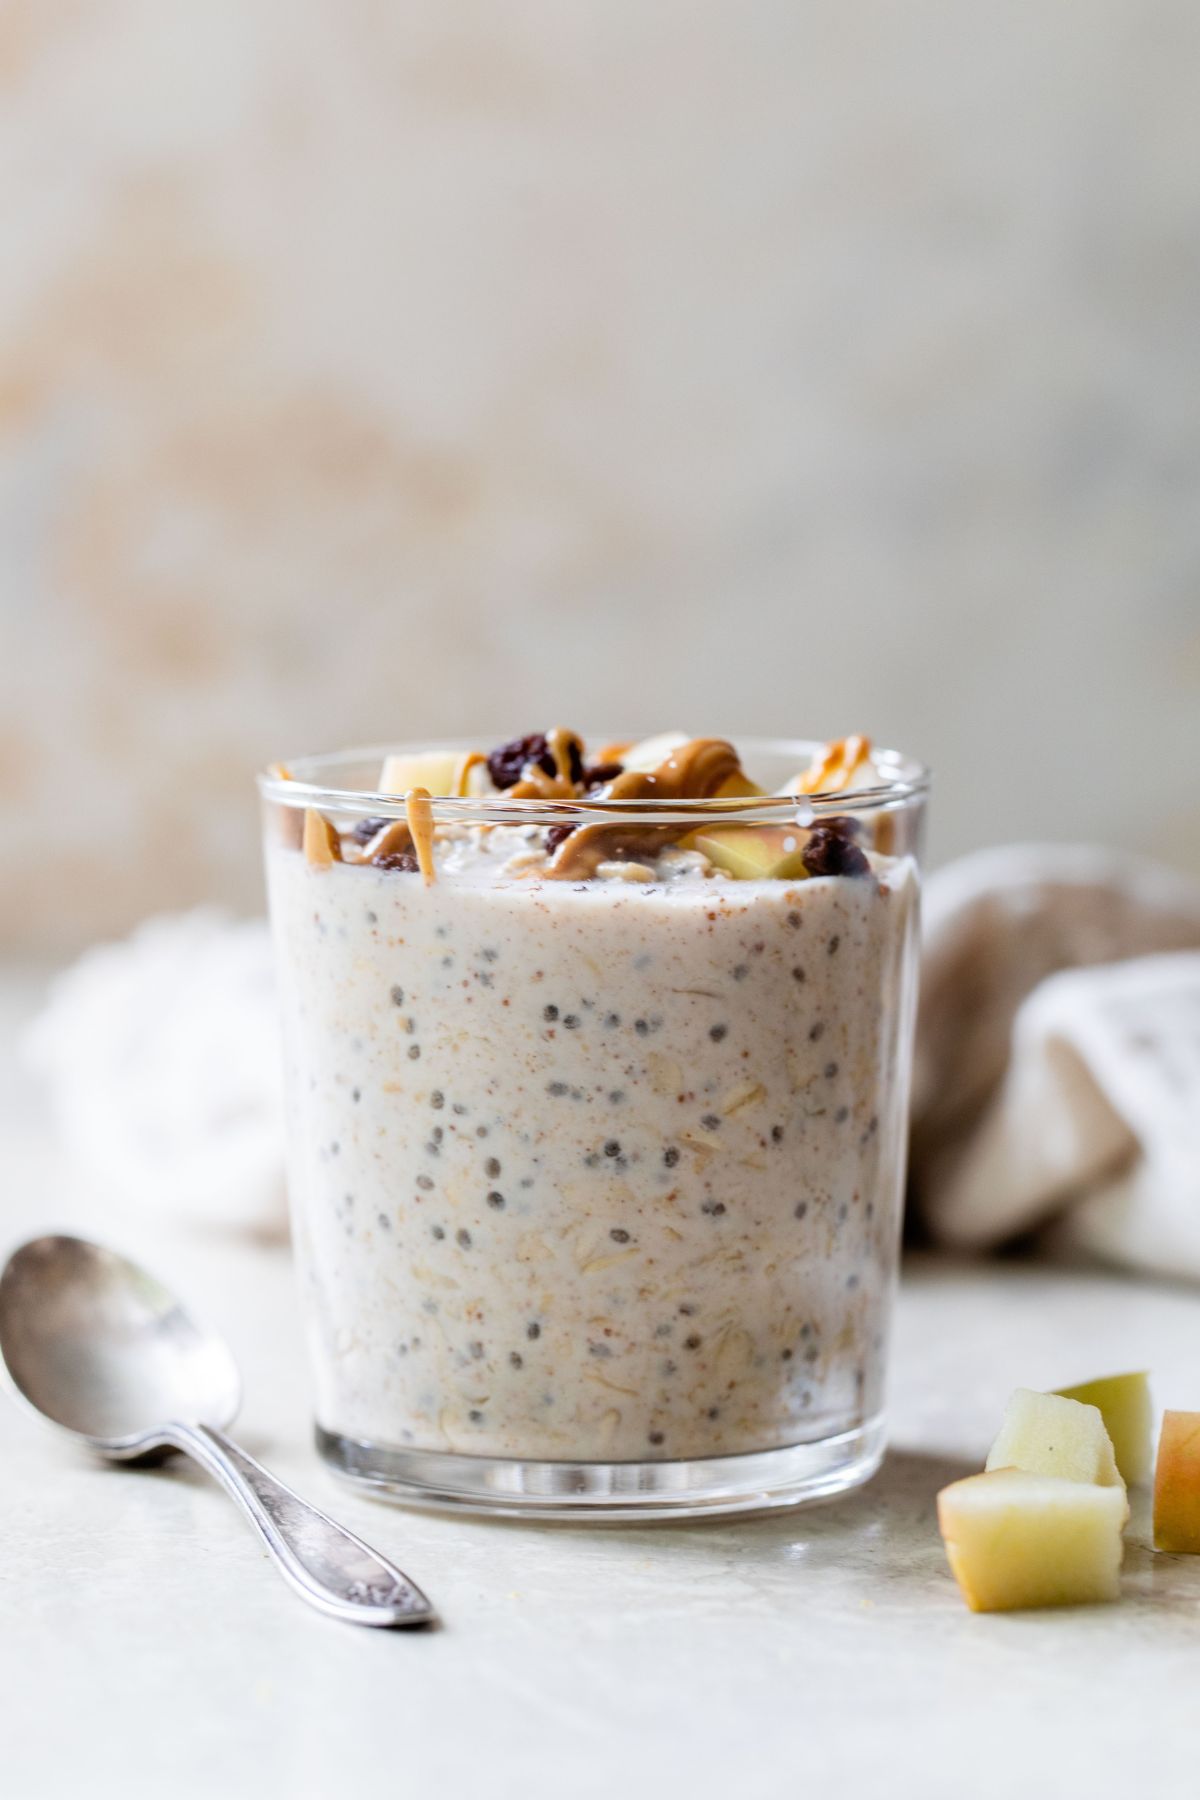 Glass filled with overnight oats and topped with chopped apple, raisins and peanut butter.